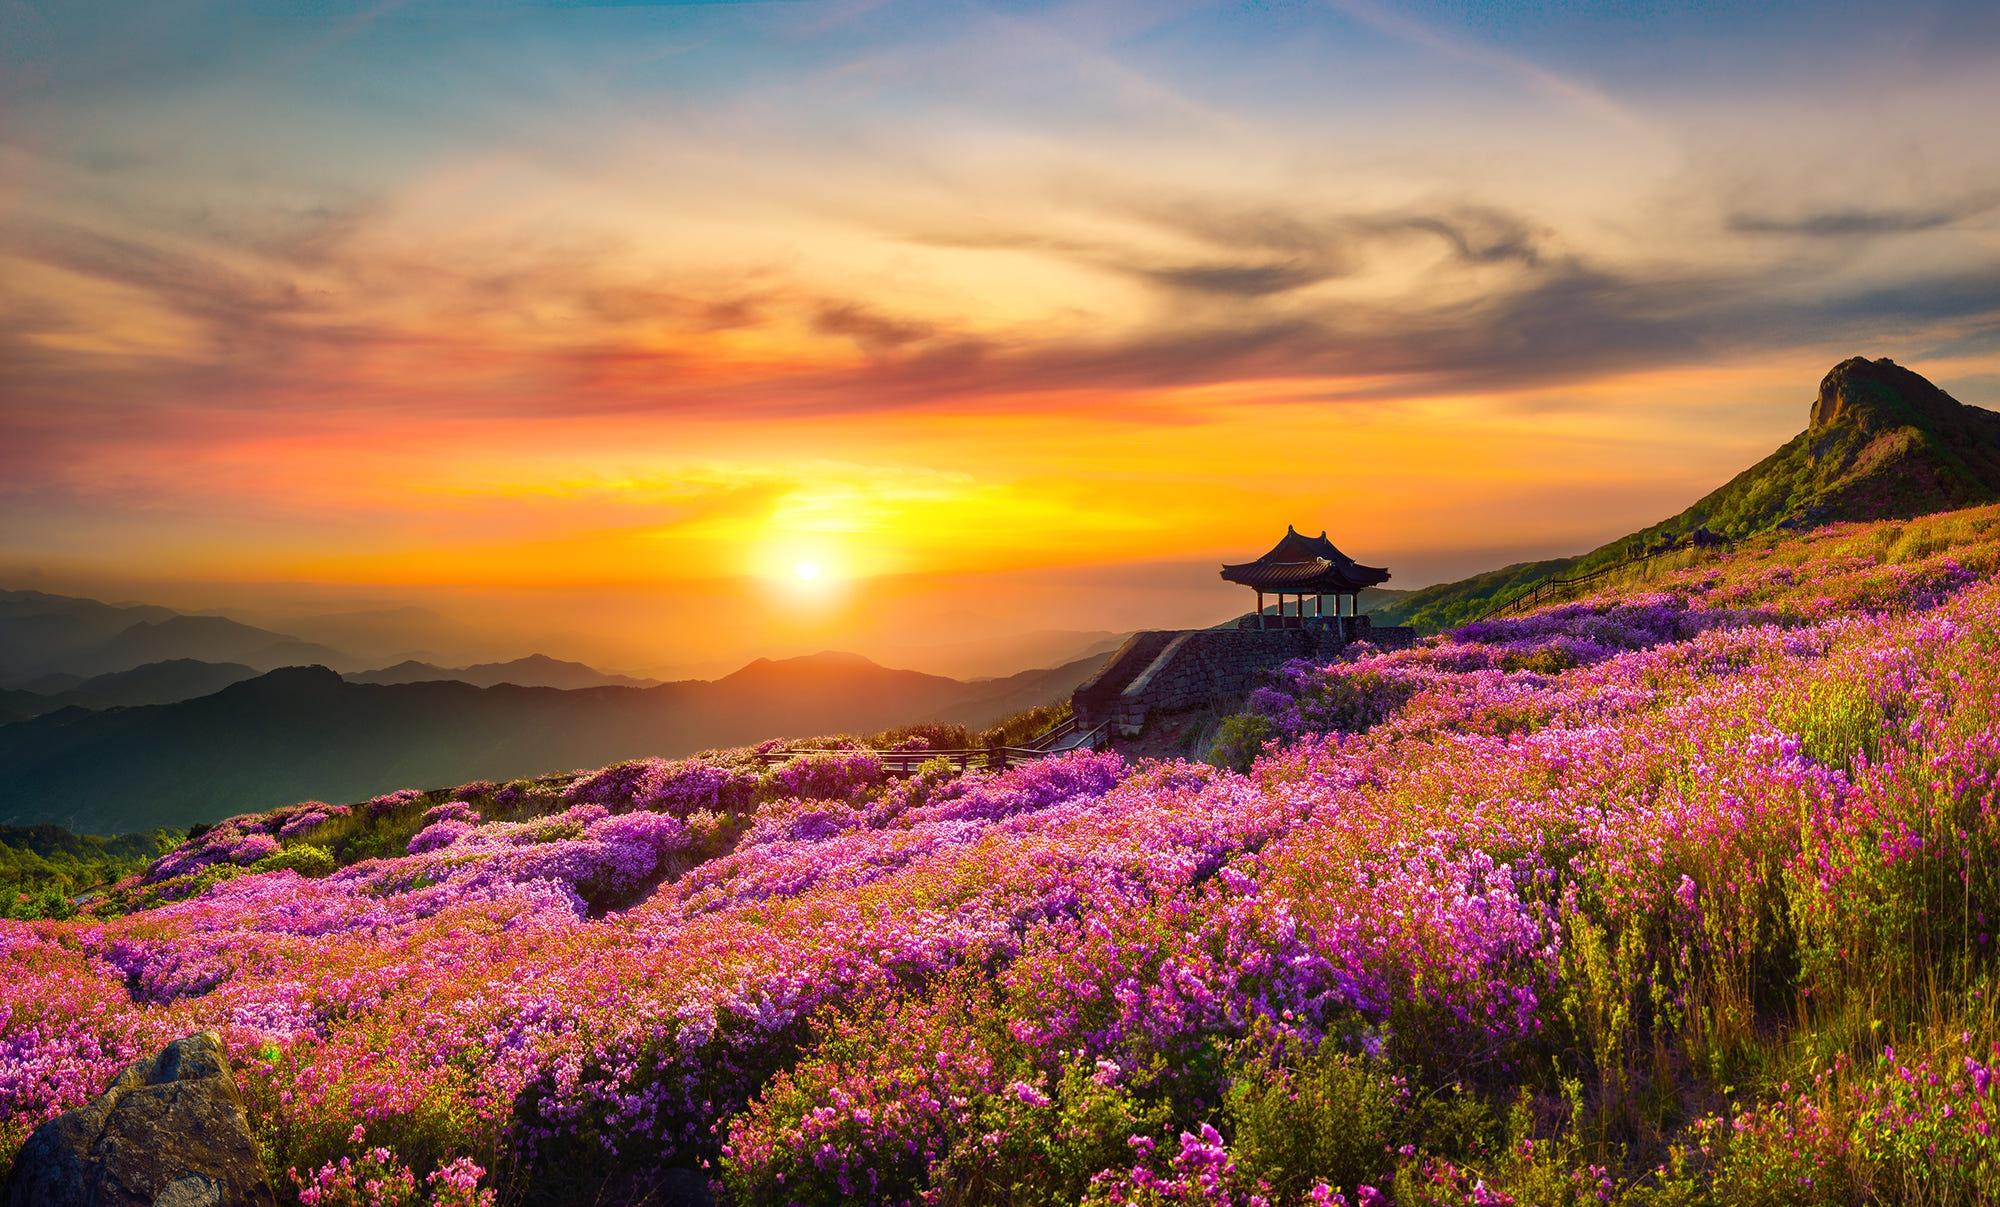 First Daylight on a Field of Wildflowers HD Wallpaper. Background